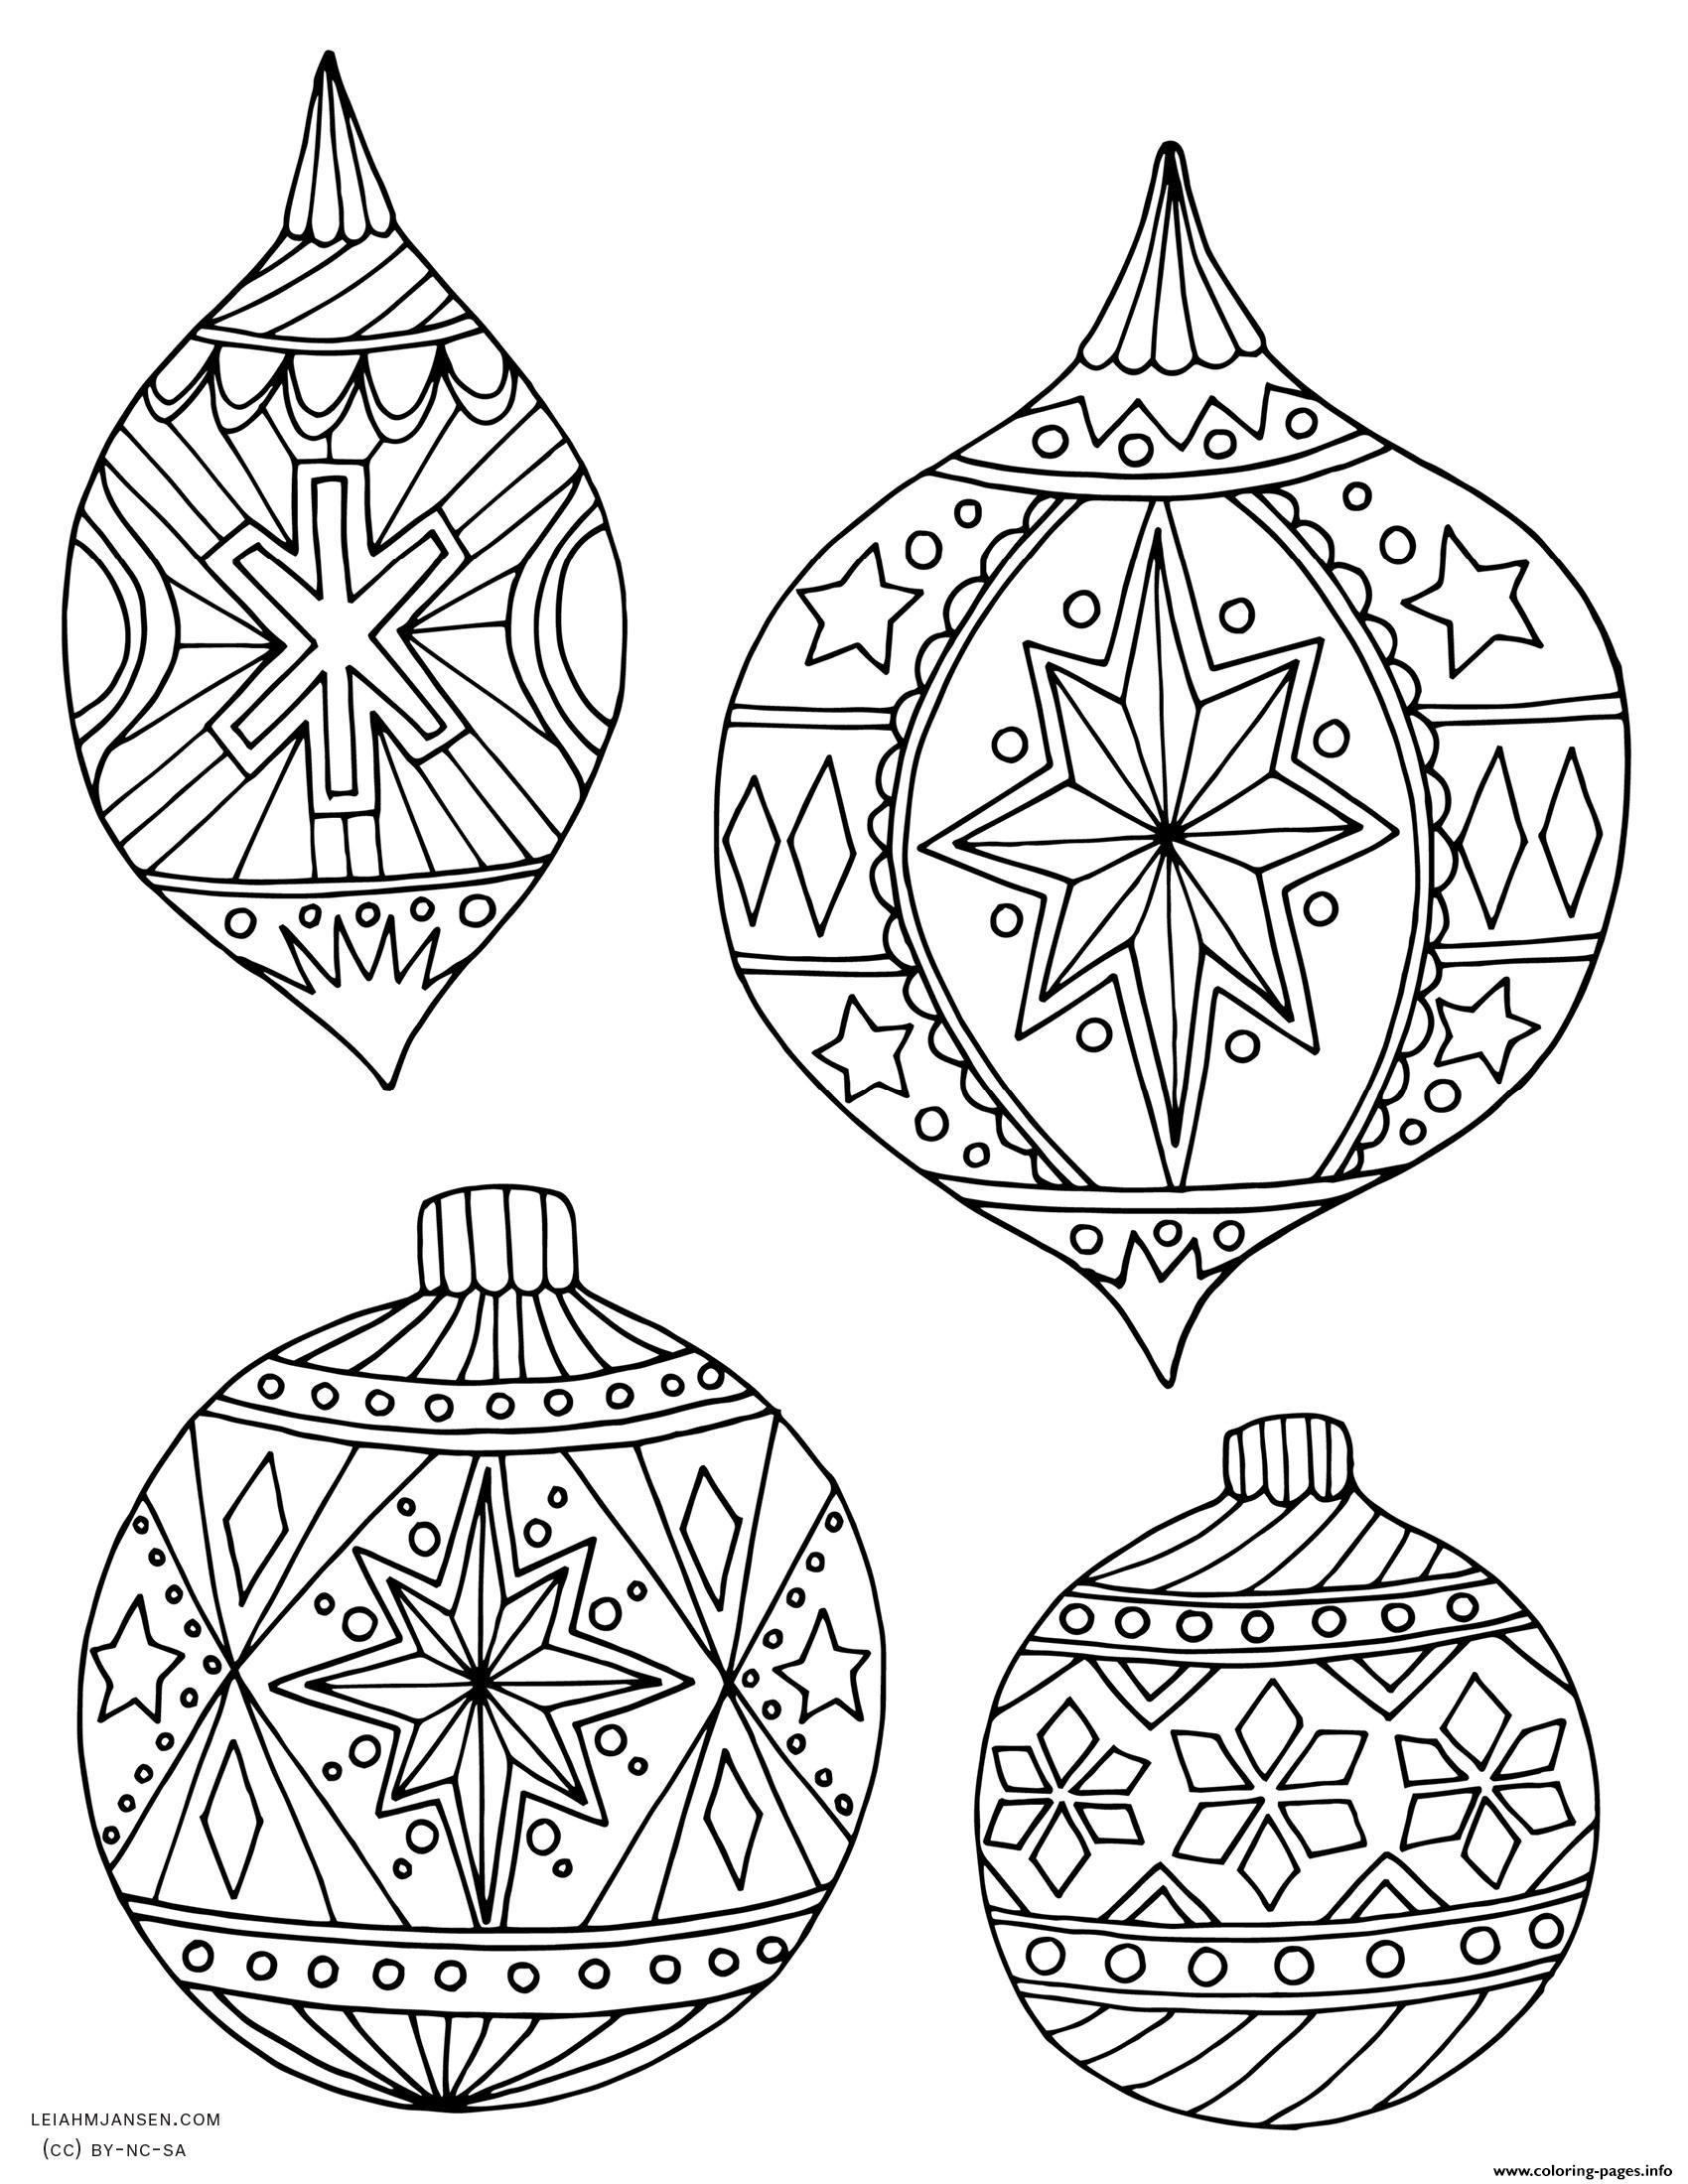 Coloring Pages Of Christmas Ornaments